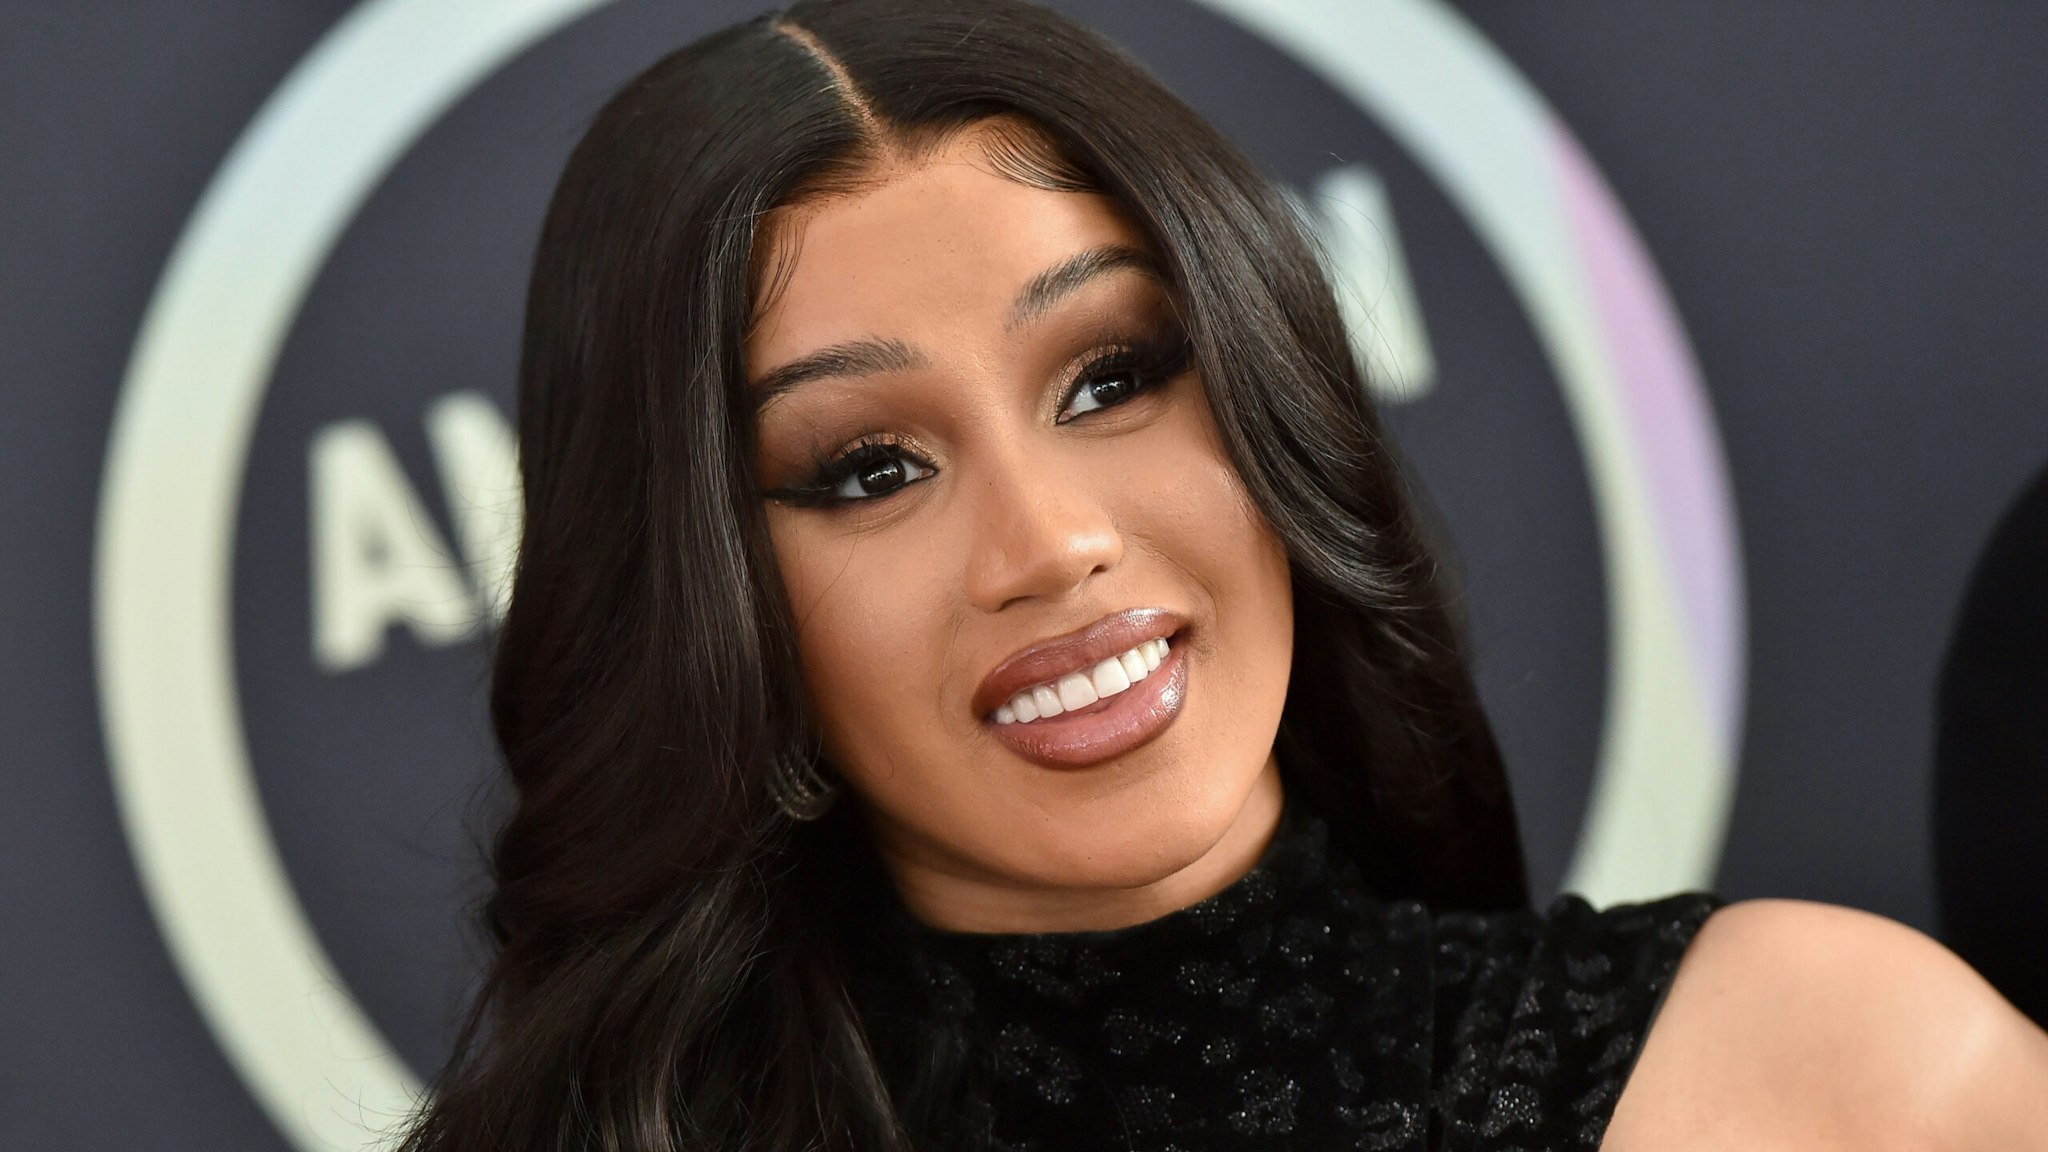 LOS ANGELES, CALIFORNIA - NOVEMBER 19: Cardi B attends the 2021 American Music Awards Red Carpet Roll-Out with host Cardi B at L.A. LIVE on November 19, 2021 in Los Angeles, California.